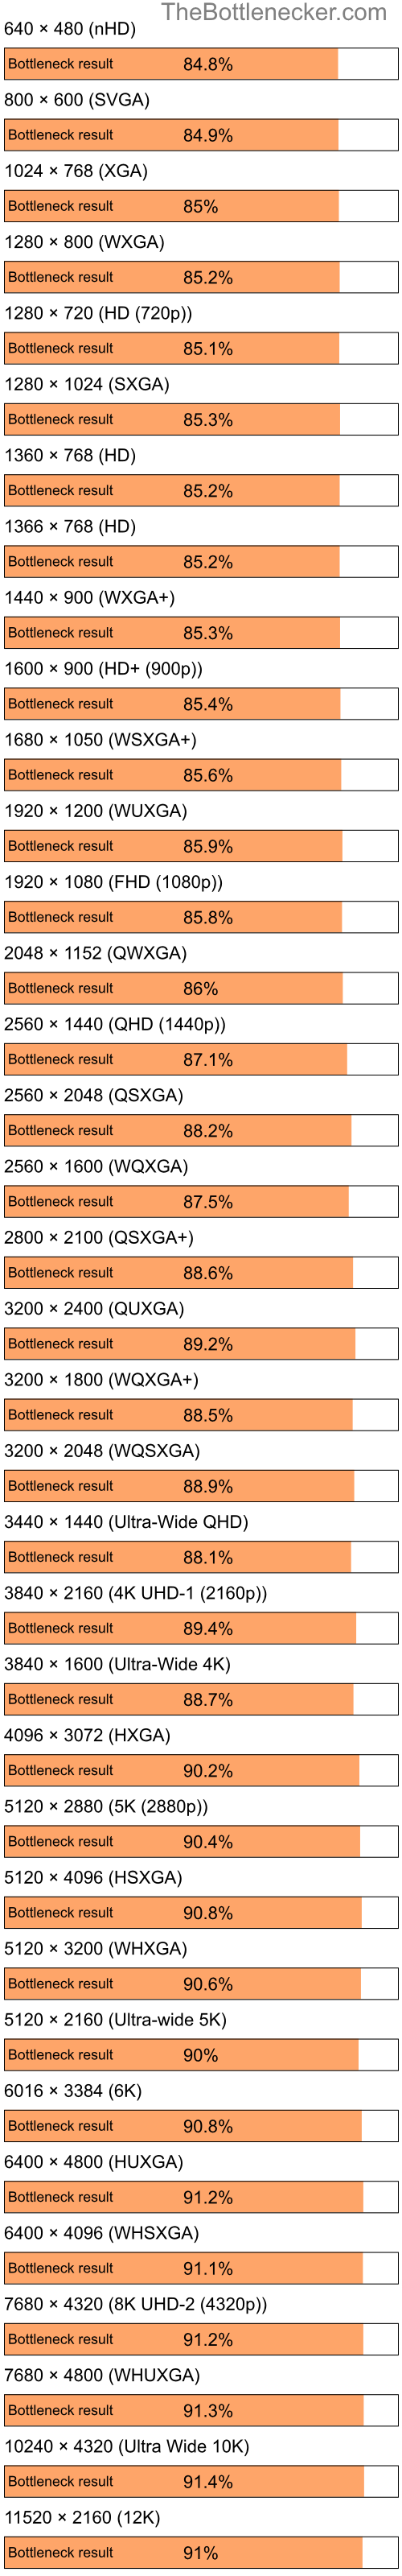 Bottleneck results by resolution for Intel Pentium 4 and NVIDIA GeForce FX Go 5200 in Processor Intense Tasks